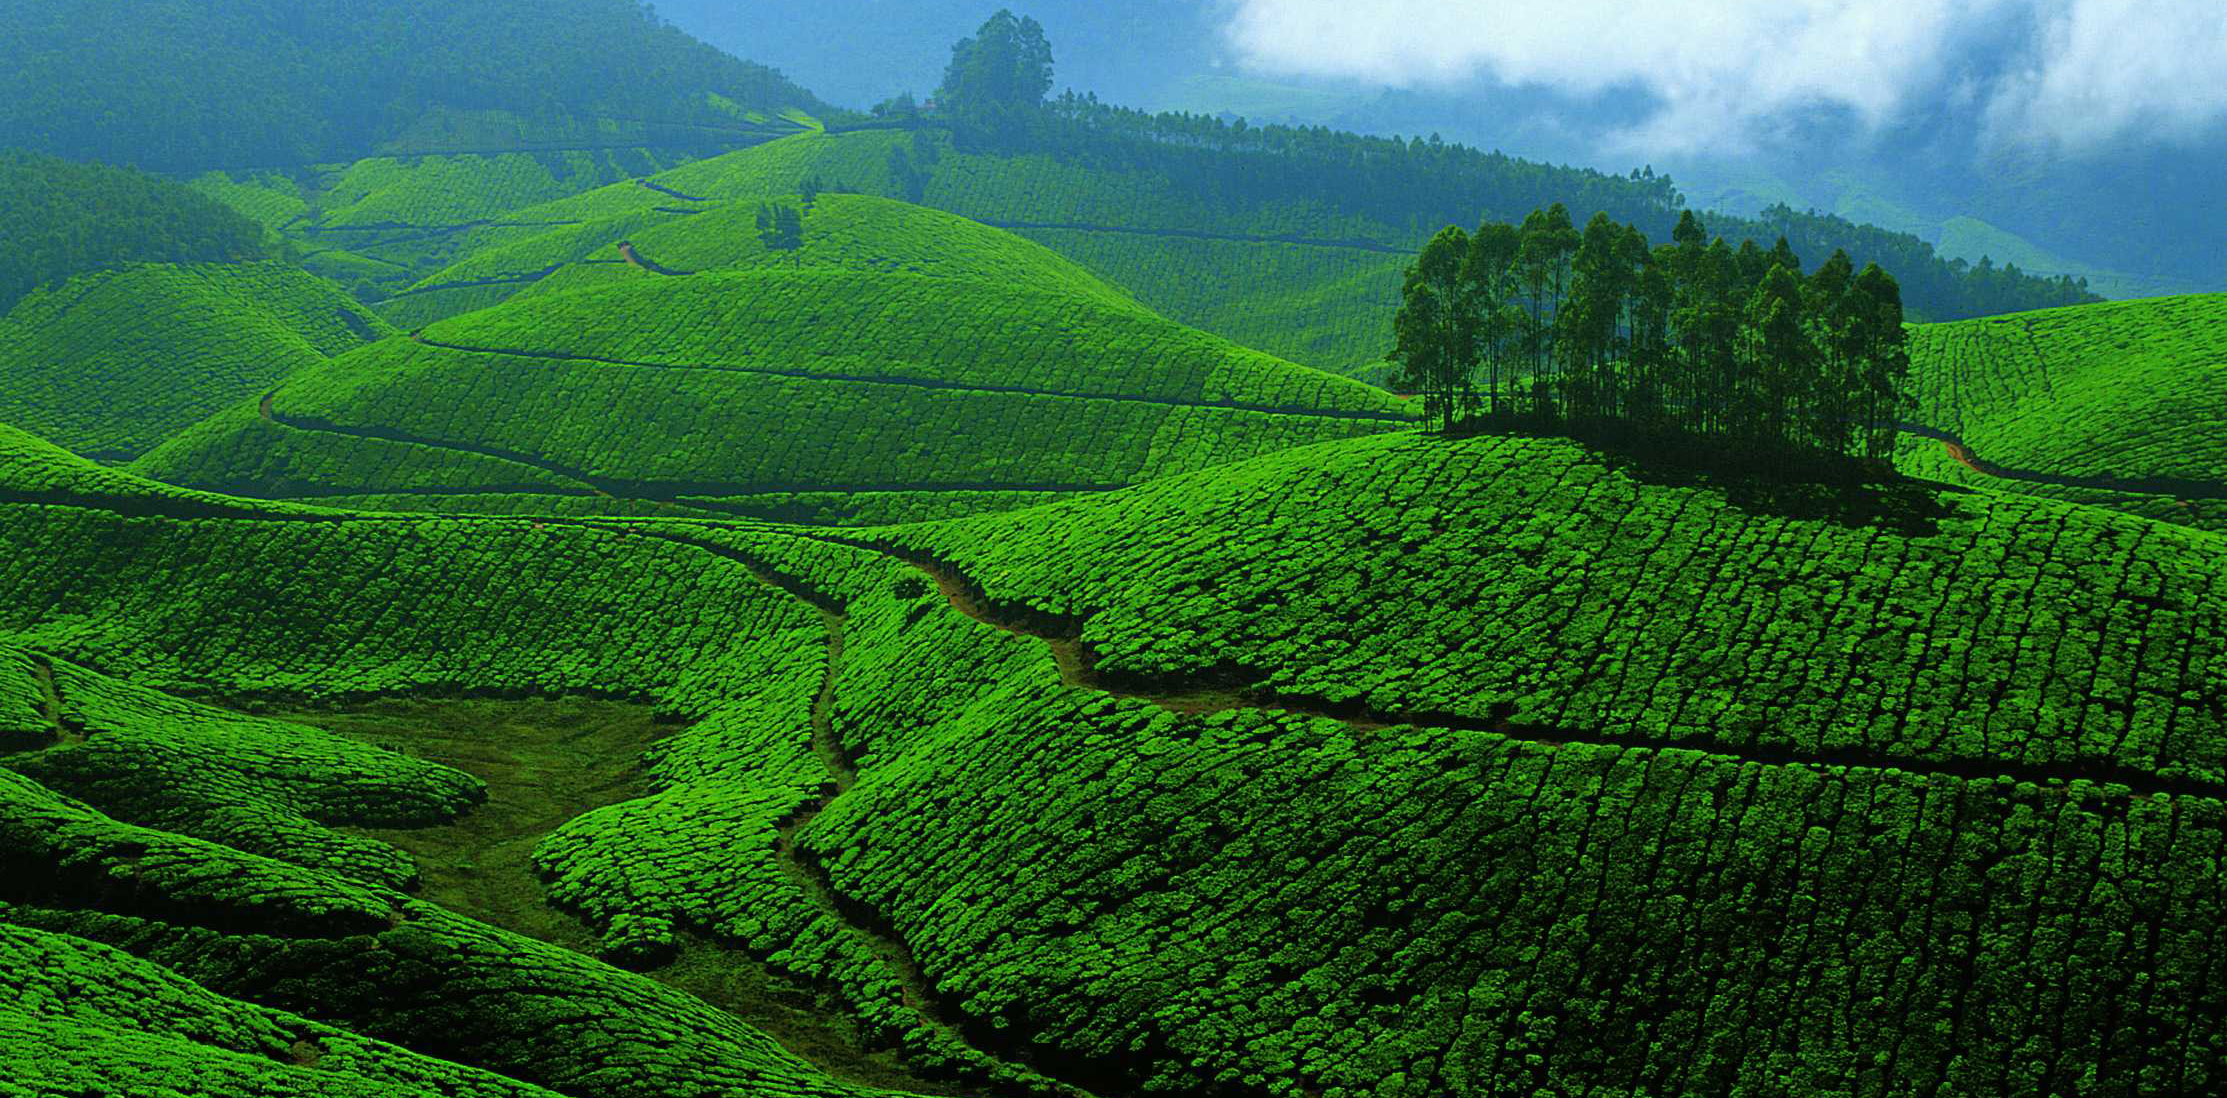 Greenery of Kerala will give a lifetime of wonderful memories